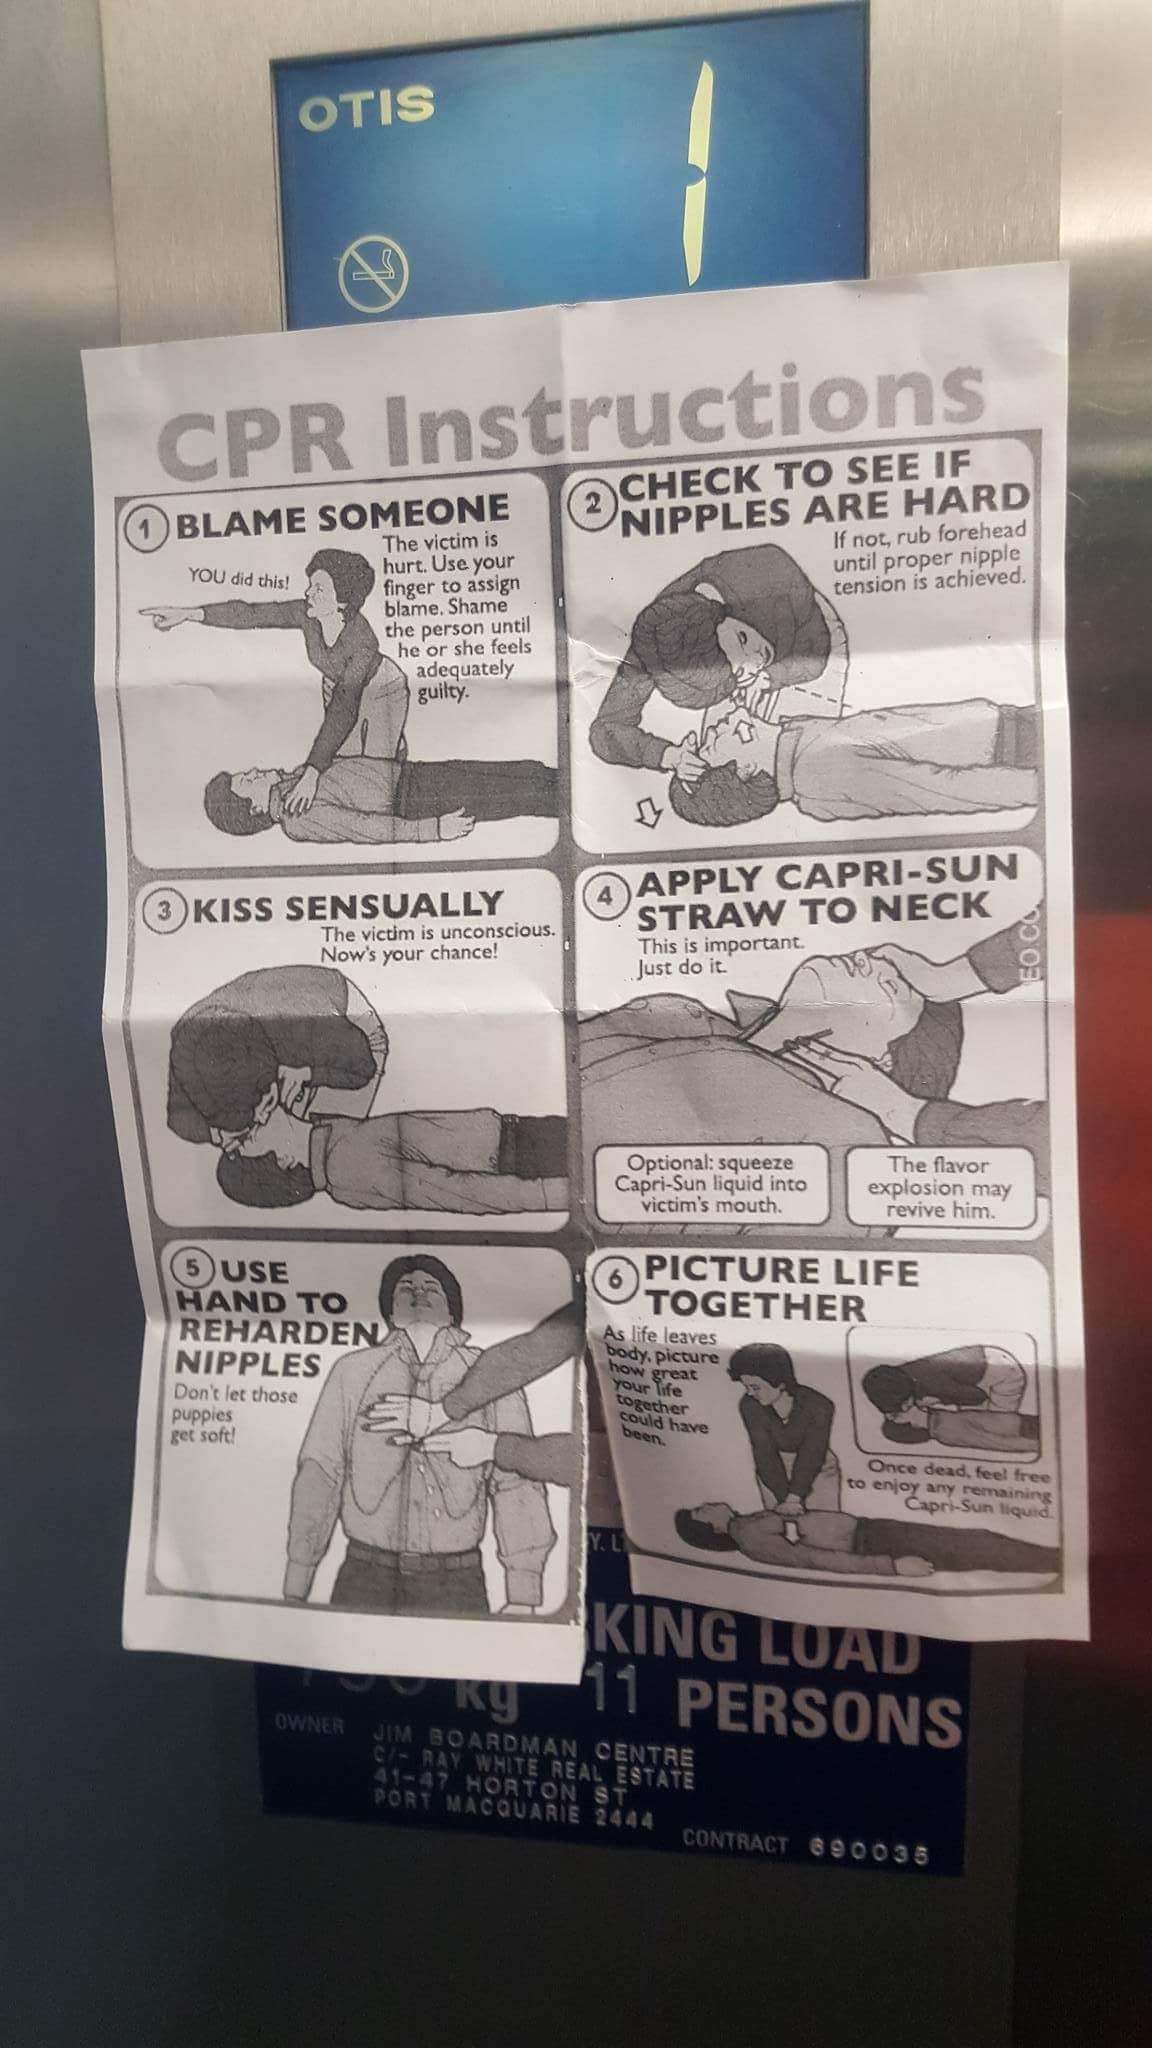 funny cpr instructions - Otis Cpr Instructions Check To See If Nipples Are Hard If not, rub forehead until proper nipple tension is achieved. 1 Blame Someone The victim is hurt. Use your finger to assign blame. Shame the person until he or she feels adequ